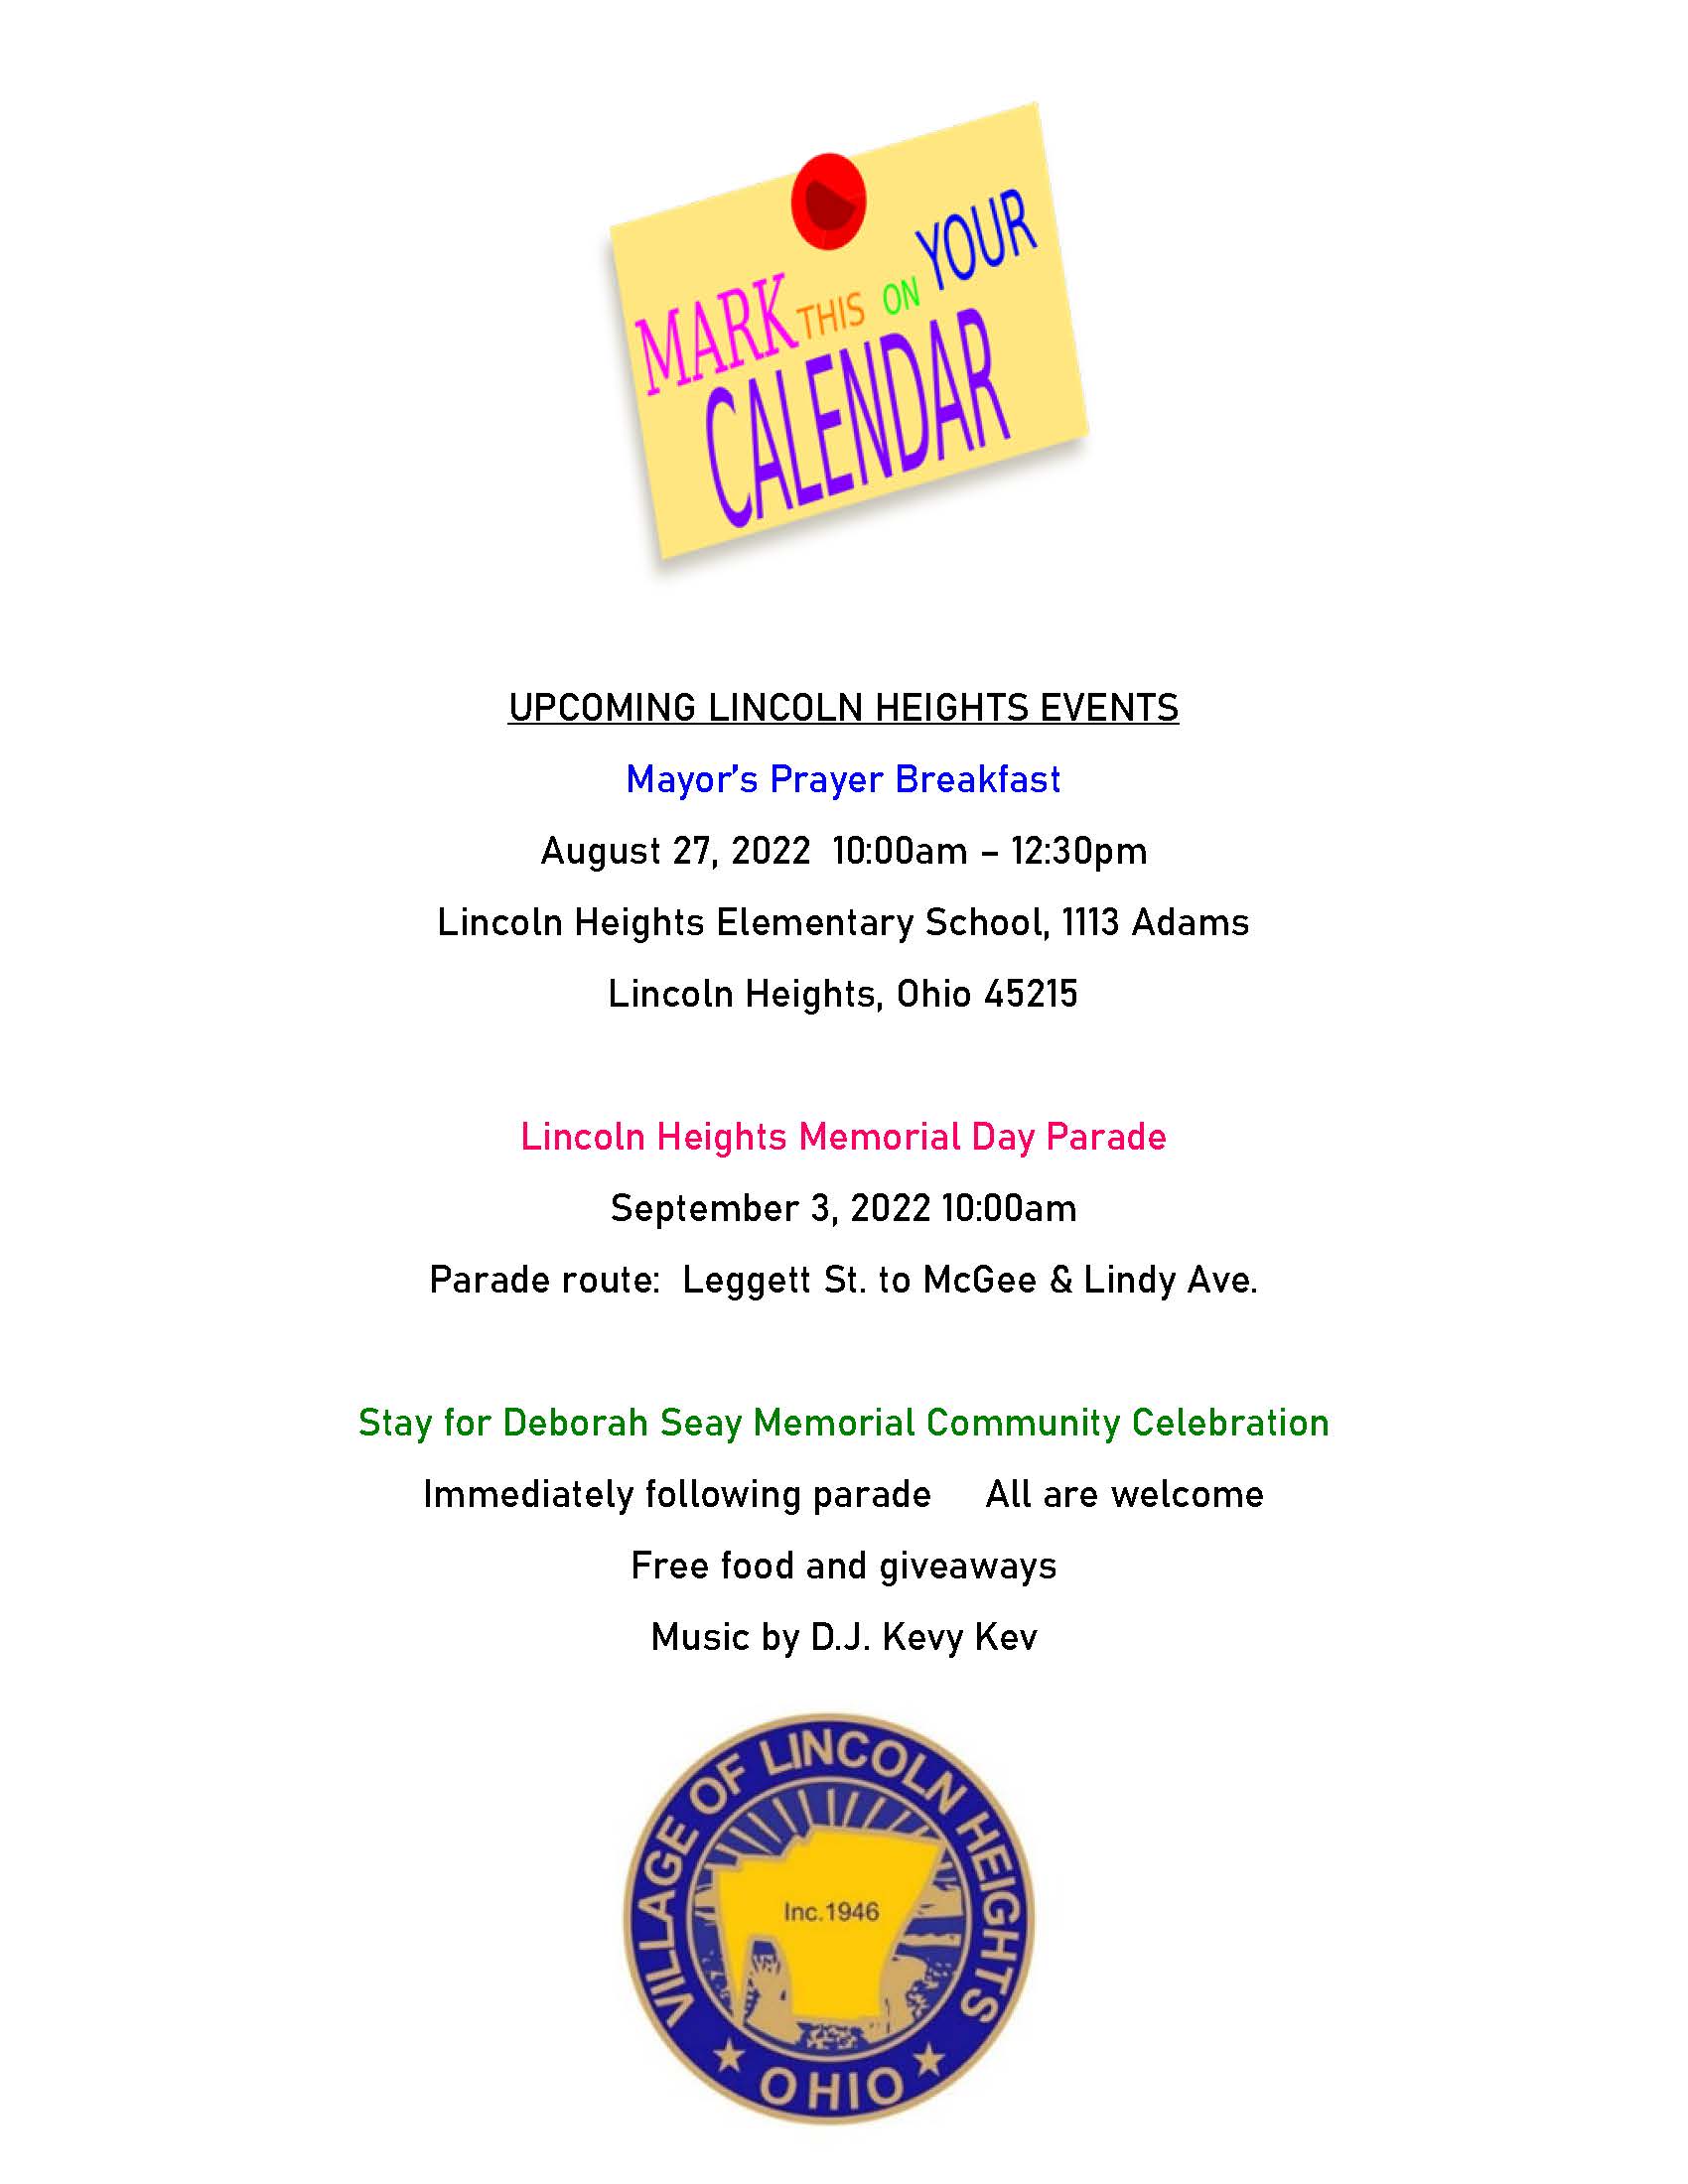 UPCOMING LINCOLN HEIGHTS EVENTS for August and September 2022